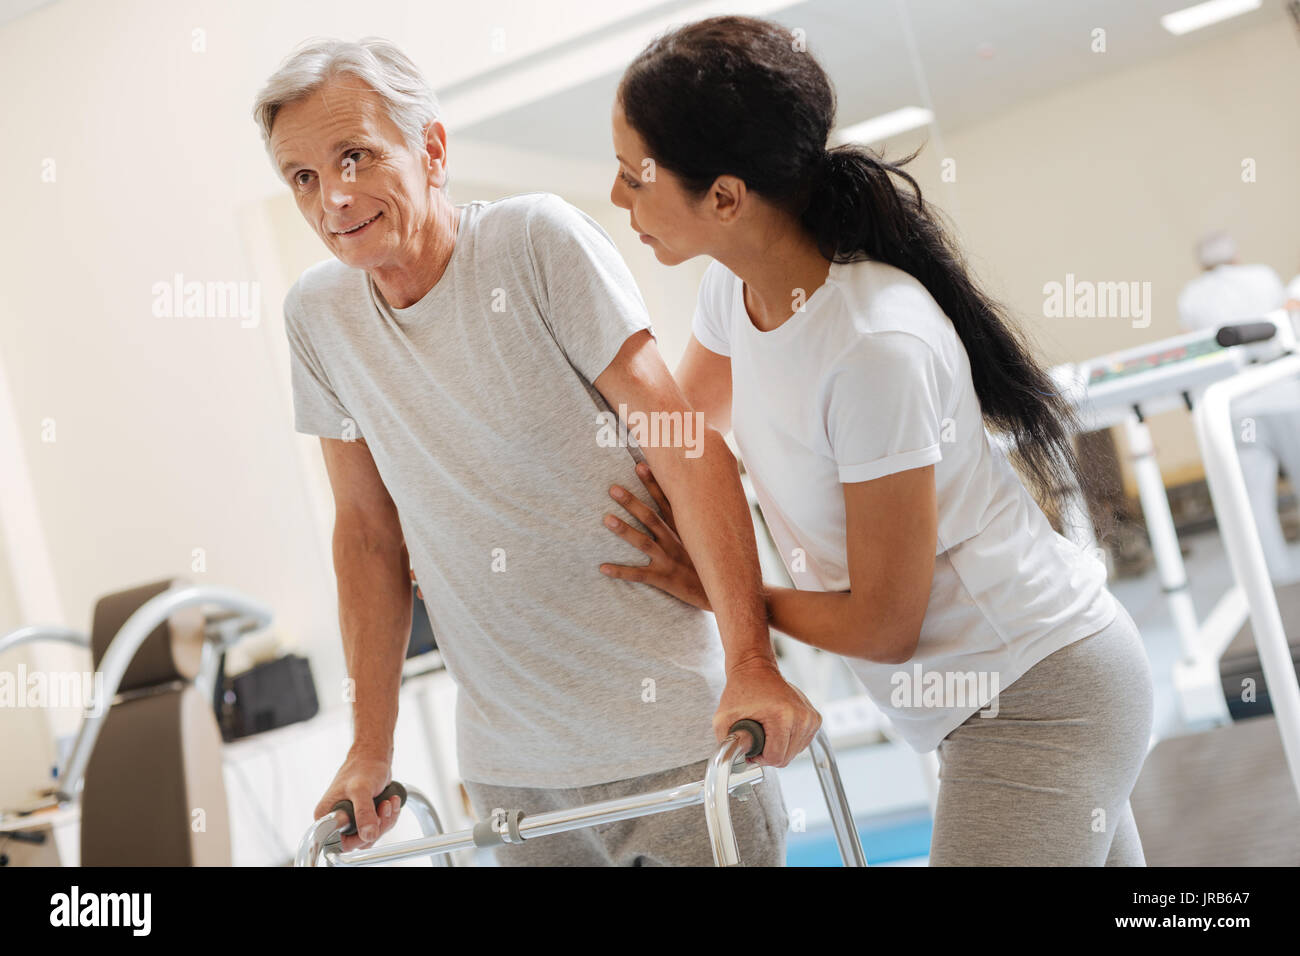 Resolute pensioner leaning on his support Stock Photo